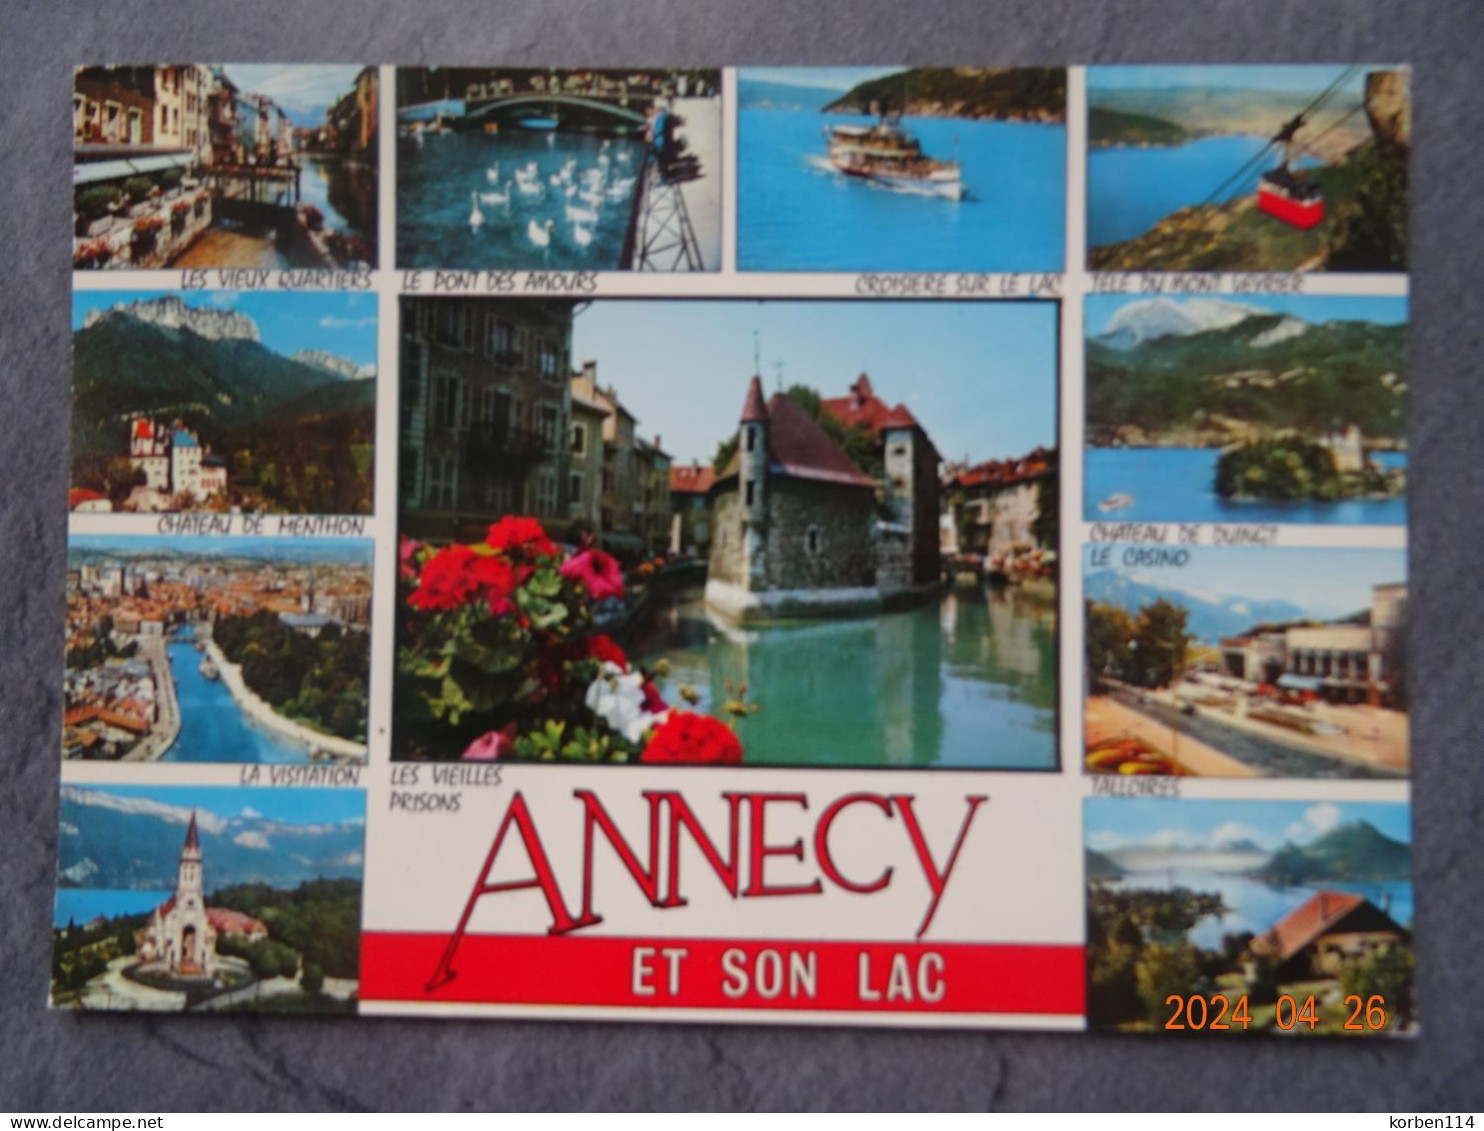 ANNECY ET SON LAC - Annecy